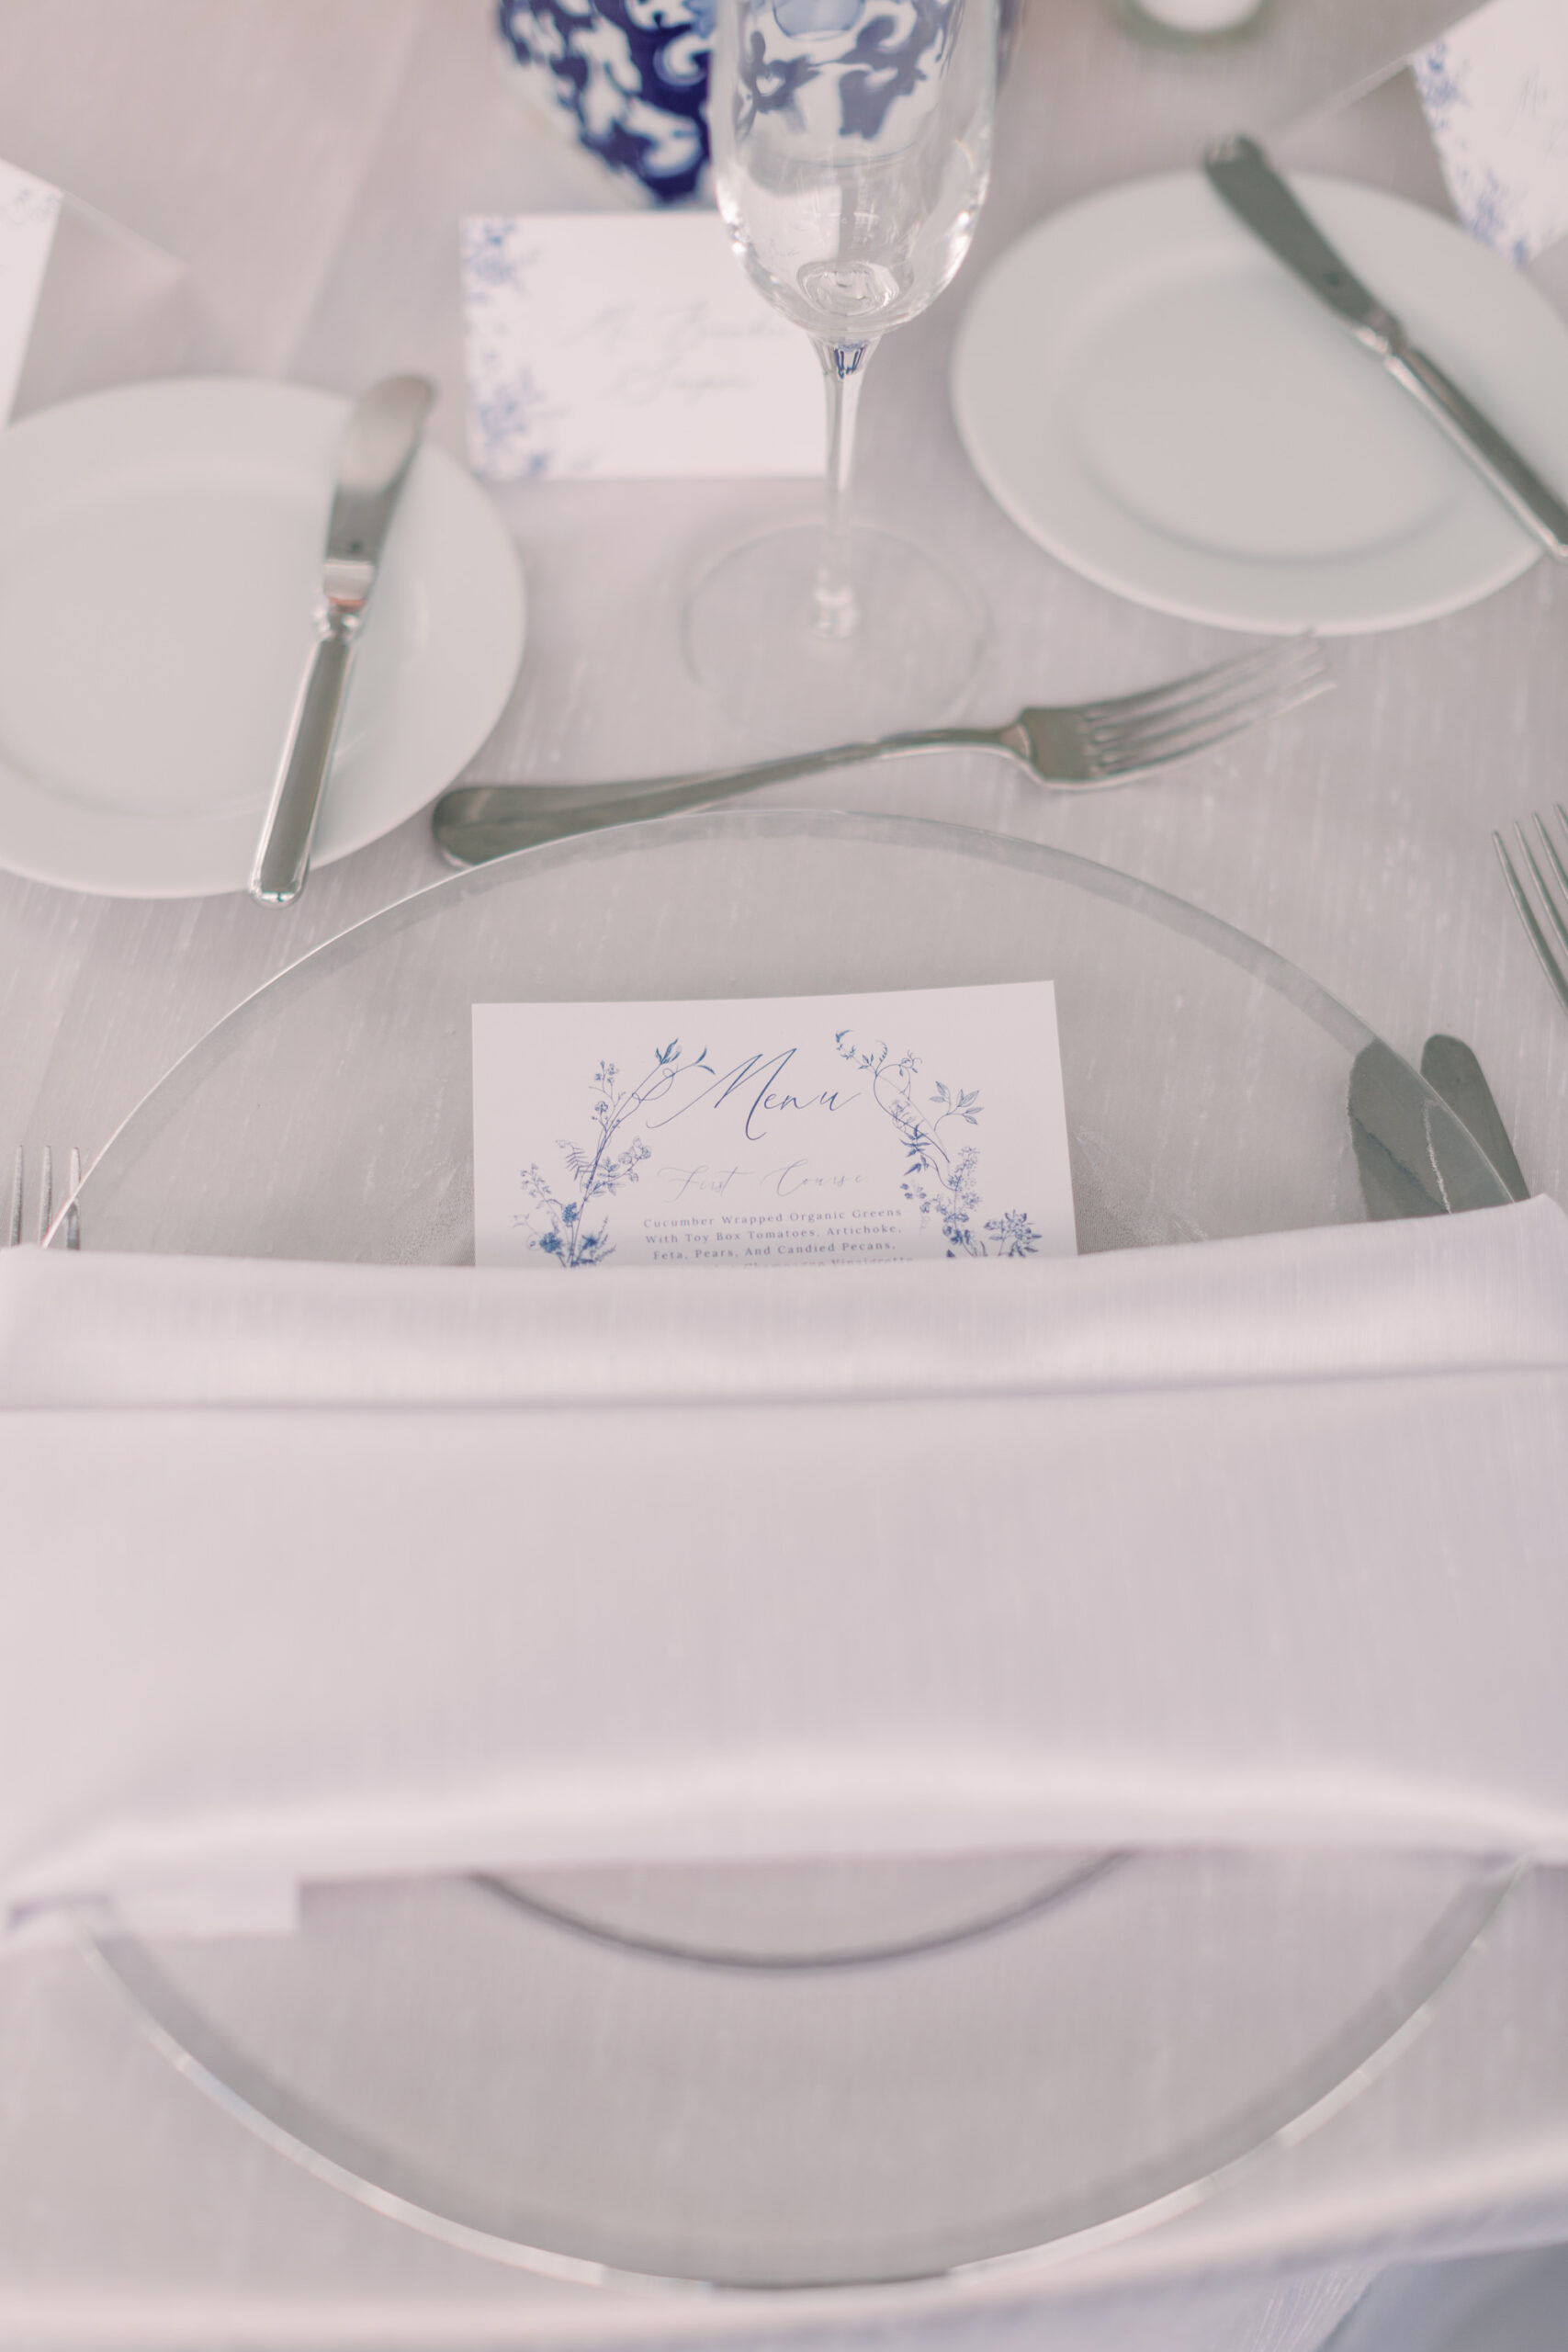 Vintage Southern Classic Wedding Reception Decor, Clear and Silver Rim Charger, White Linen Napkin, Blue and White Stationery | Tampa Bay Wedding Planner Parties A'la Carte | Clearwater Wedding Rentals Over the Top Rental Linens, Gabro Event Services